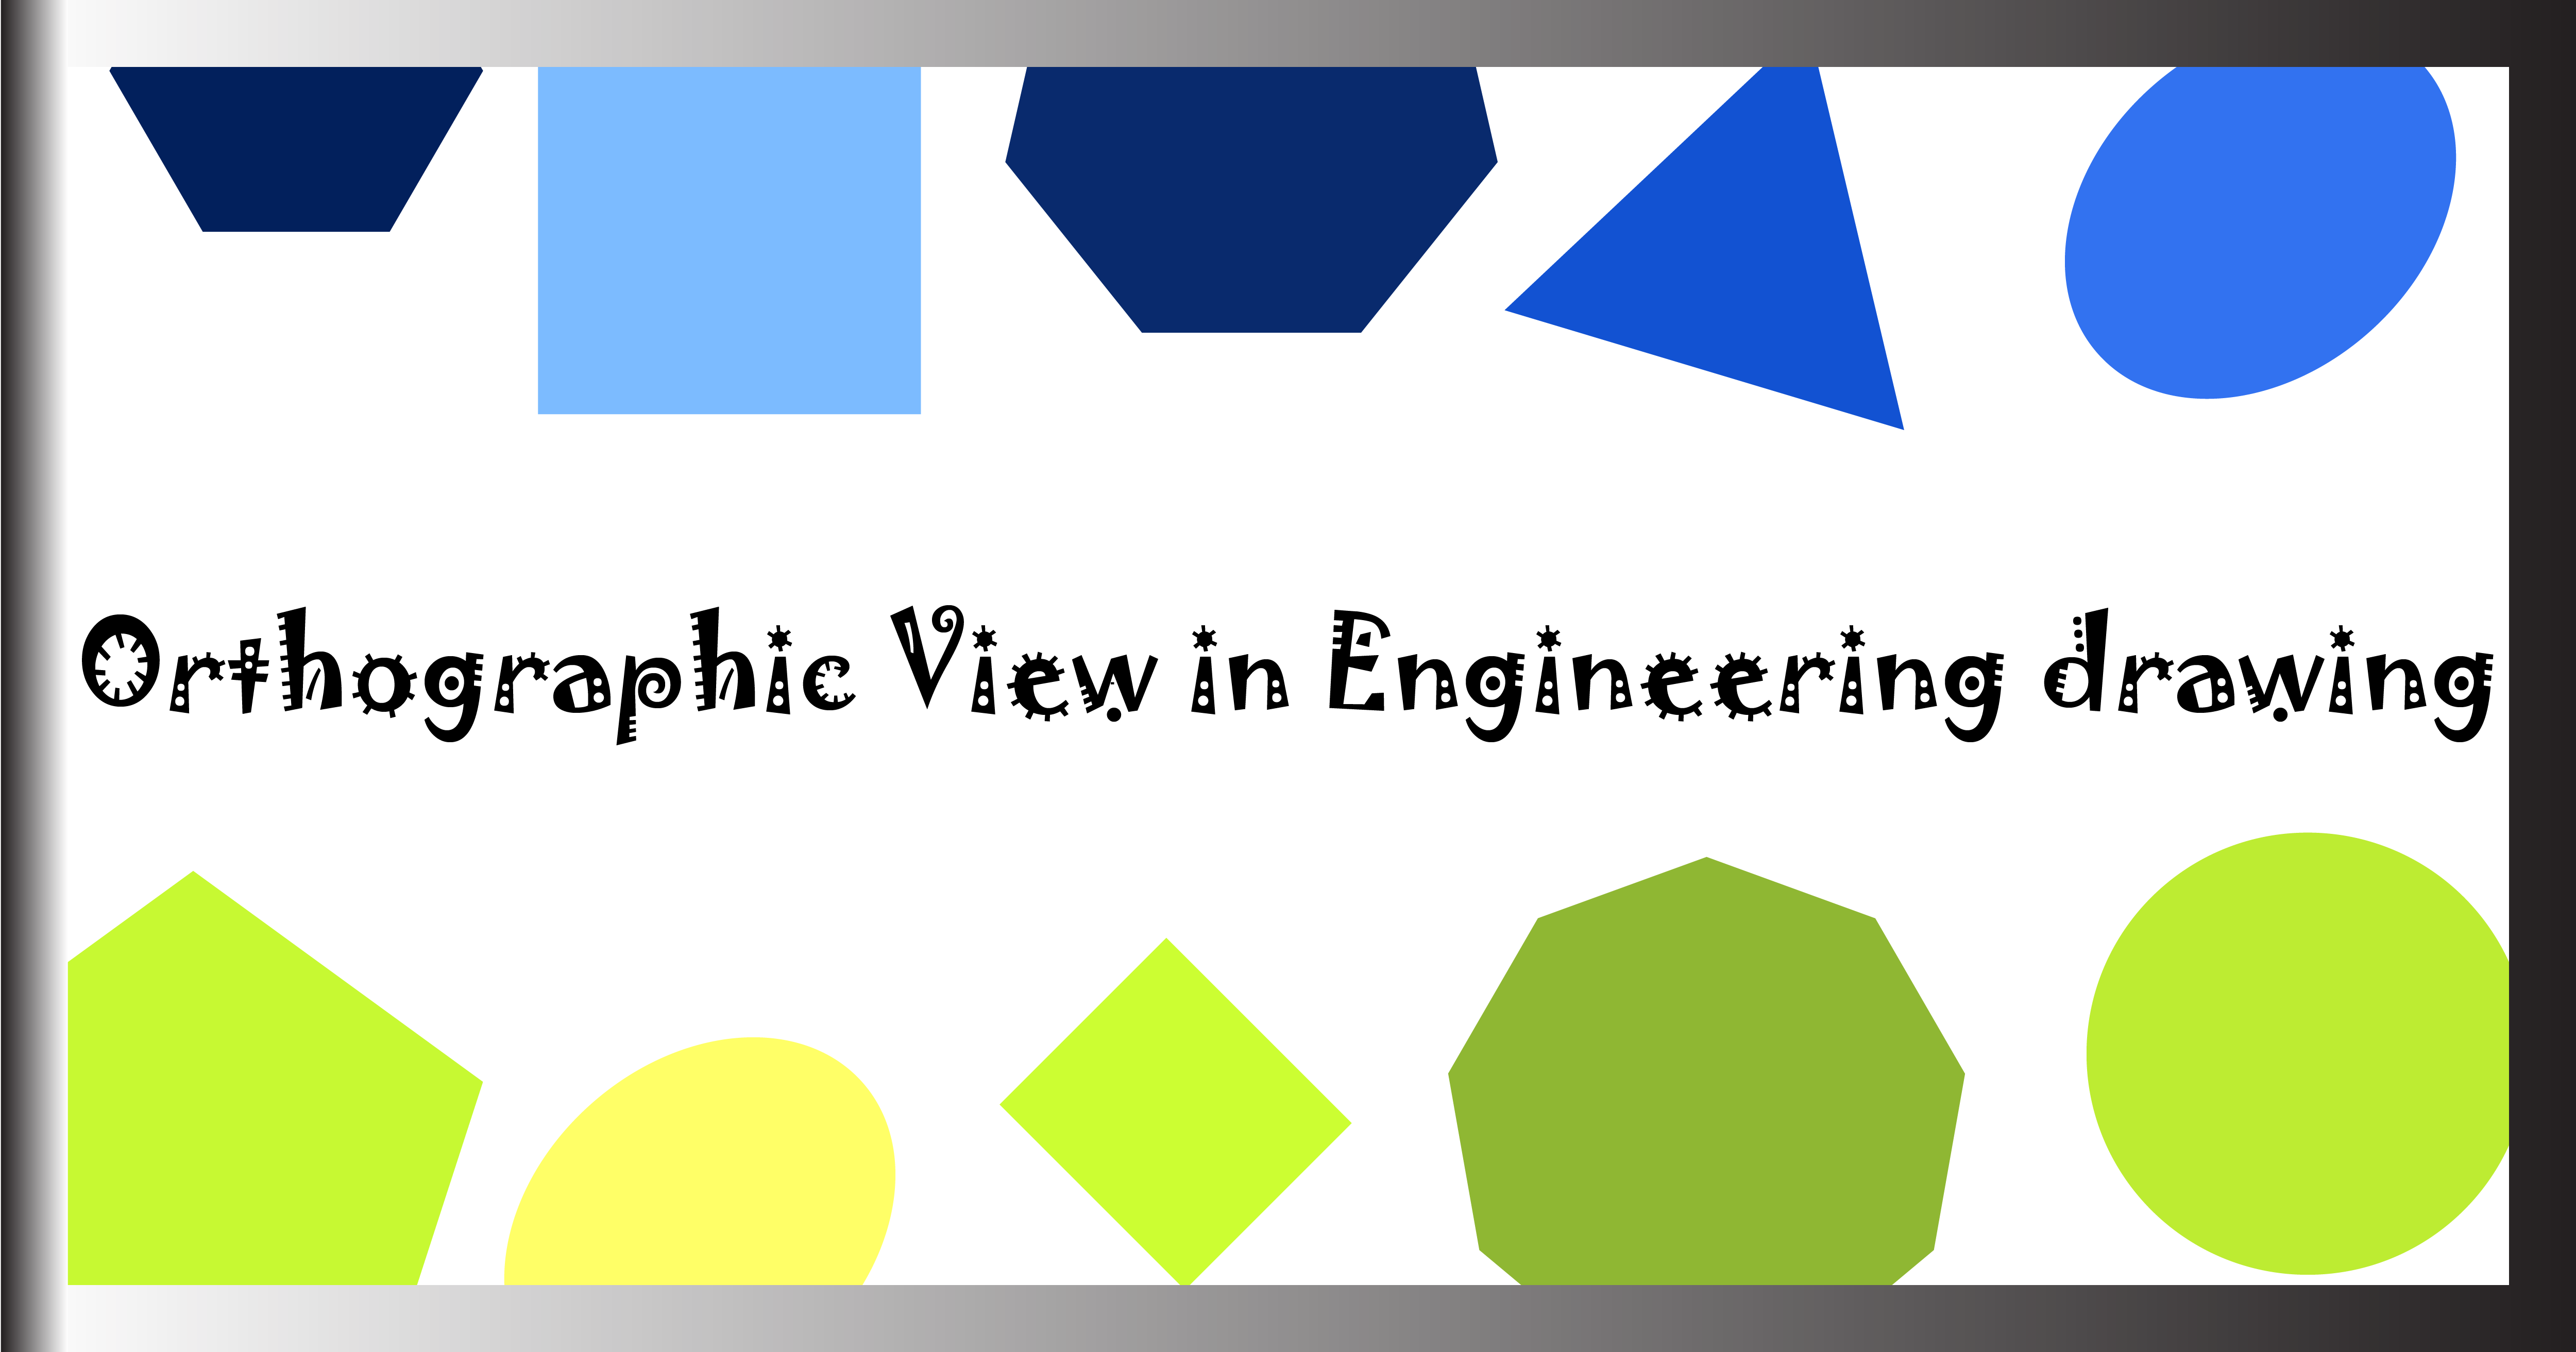 Orthographic View in Engineering drawing